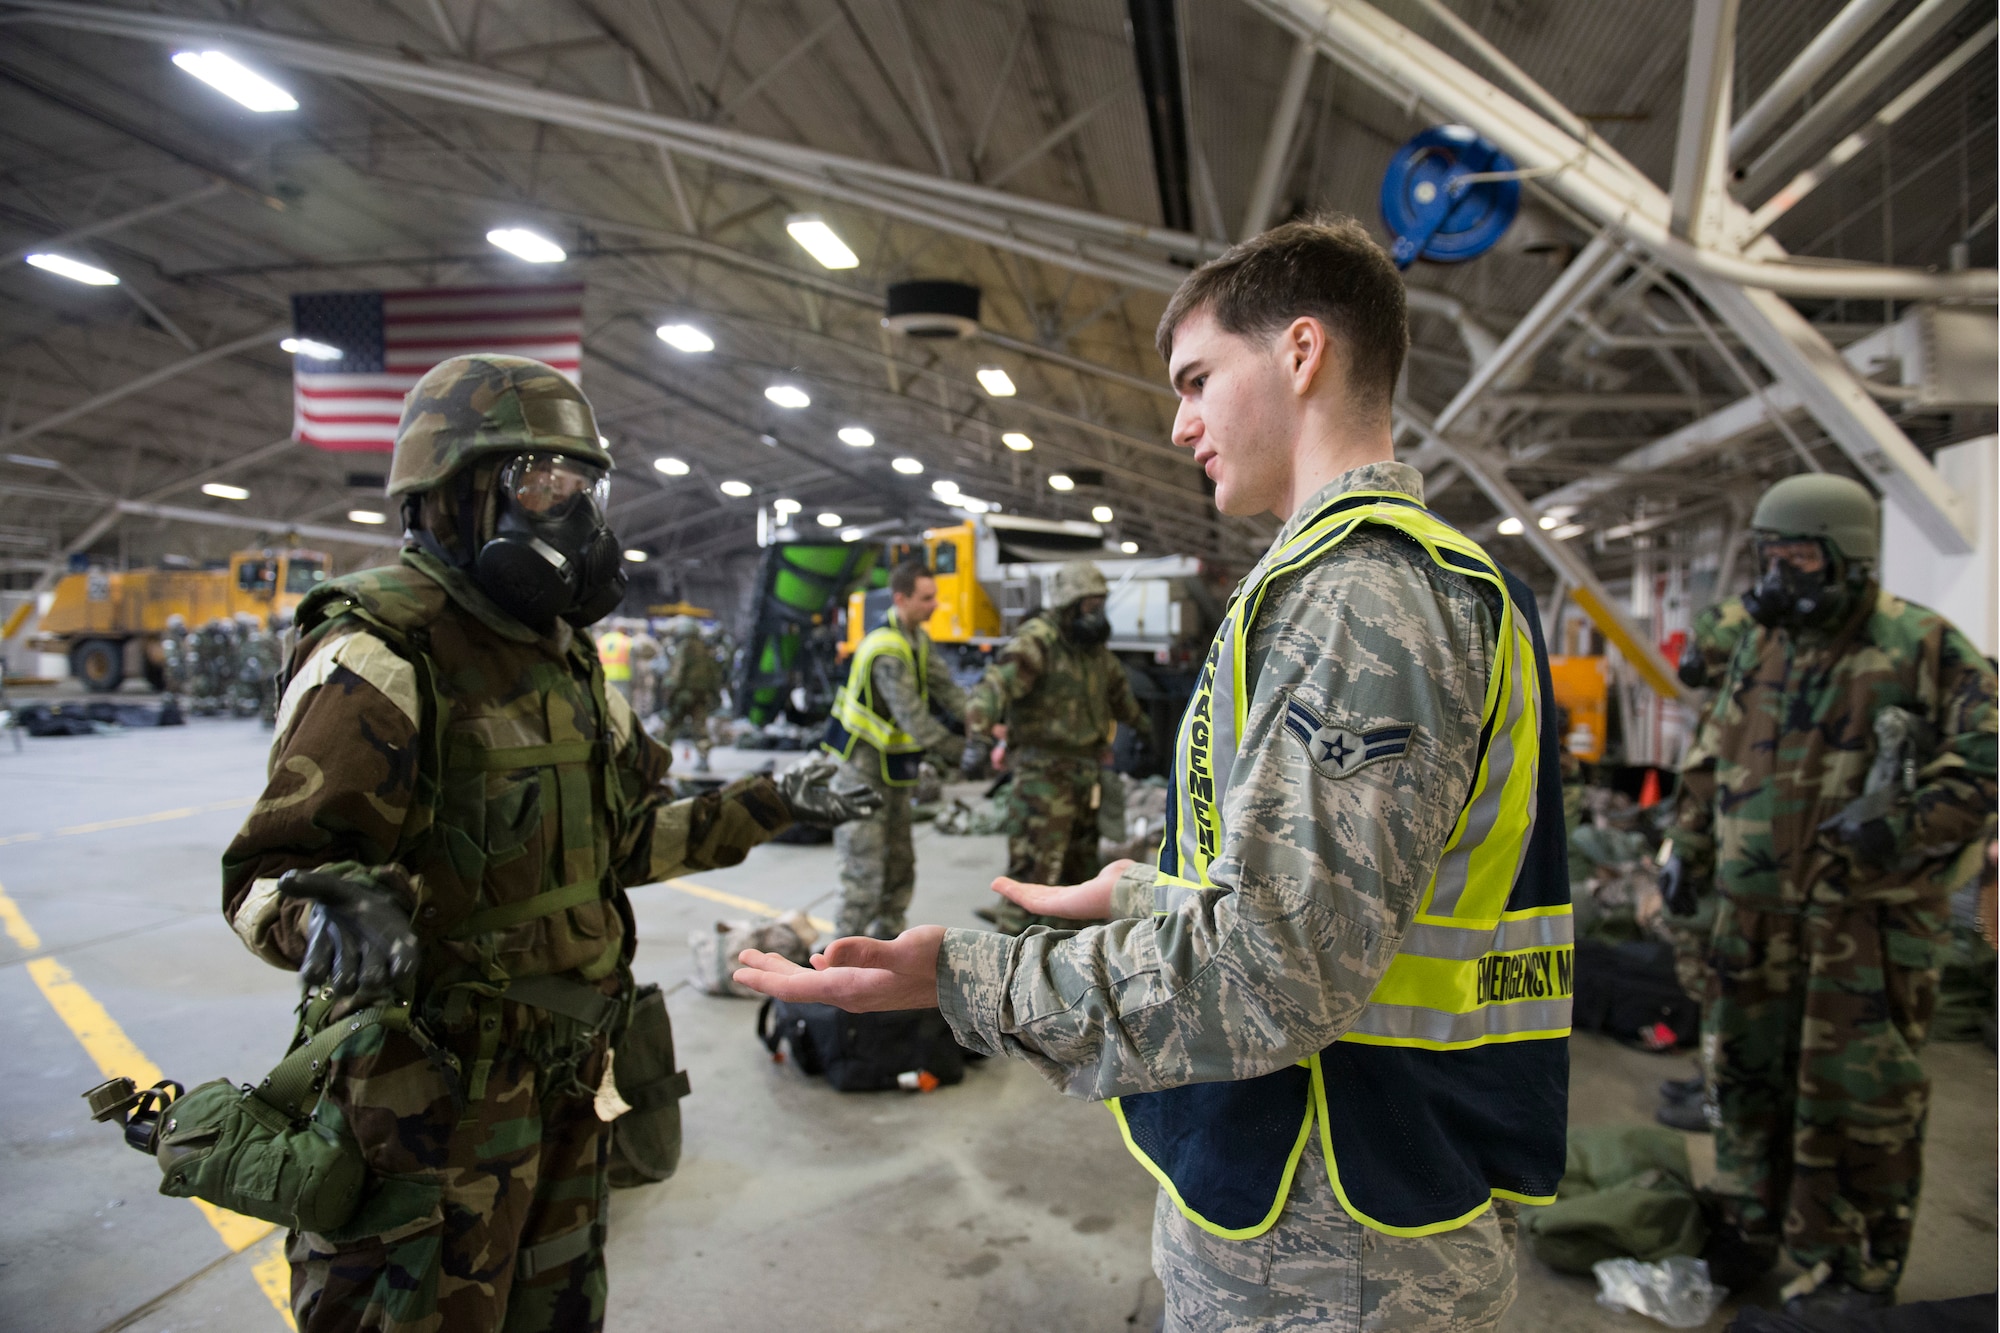 Airman 1st Class Paul Seamen, with the 773d Civil Engineer Squadron Emergency Management team, evaluates Senior Airman Stephanie Sochin, with the 773d CES Operations Management, mission-oriented protective posture level 4 gear Feb. 8, 2018, at Joint Base Elmendorf-Richardson, Alaska. Chemical, biological, radiological and nuclear defense training was incorporated into the 673d Civil Engineer Group, Prime Base Engineer Emergency Force monthly training.